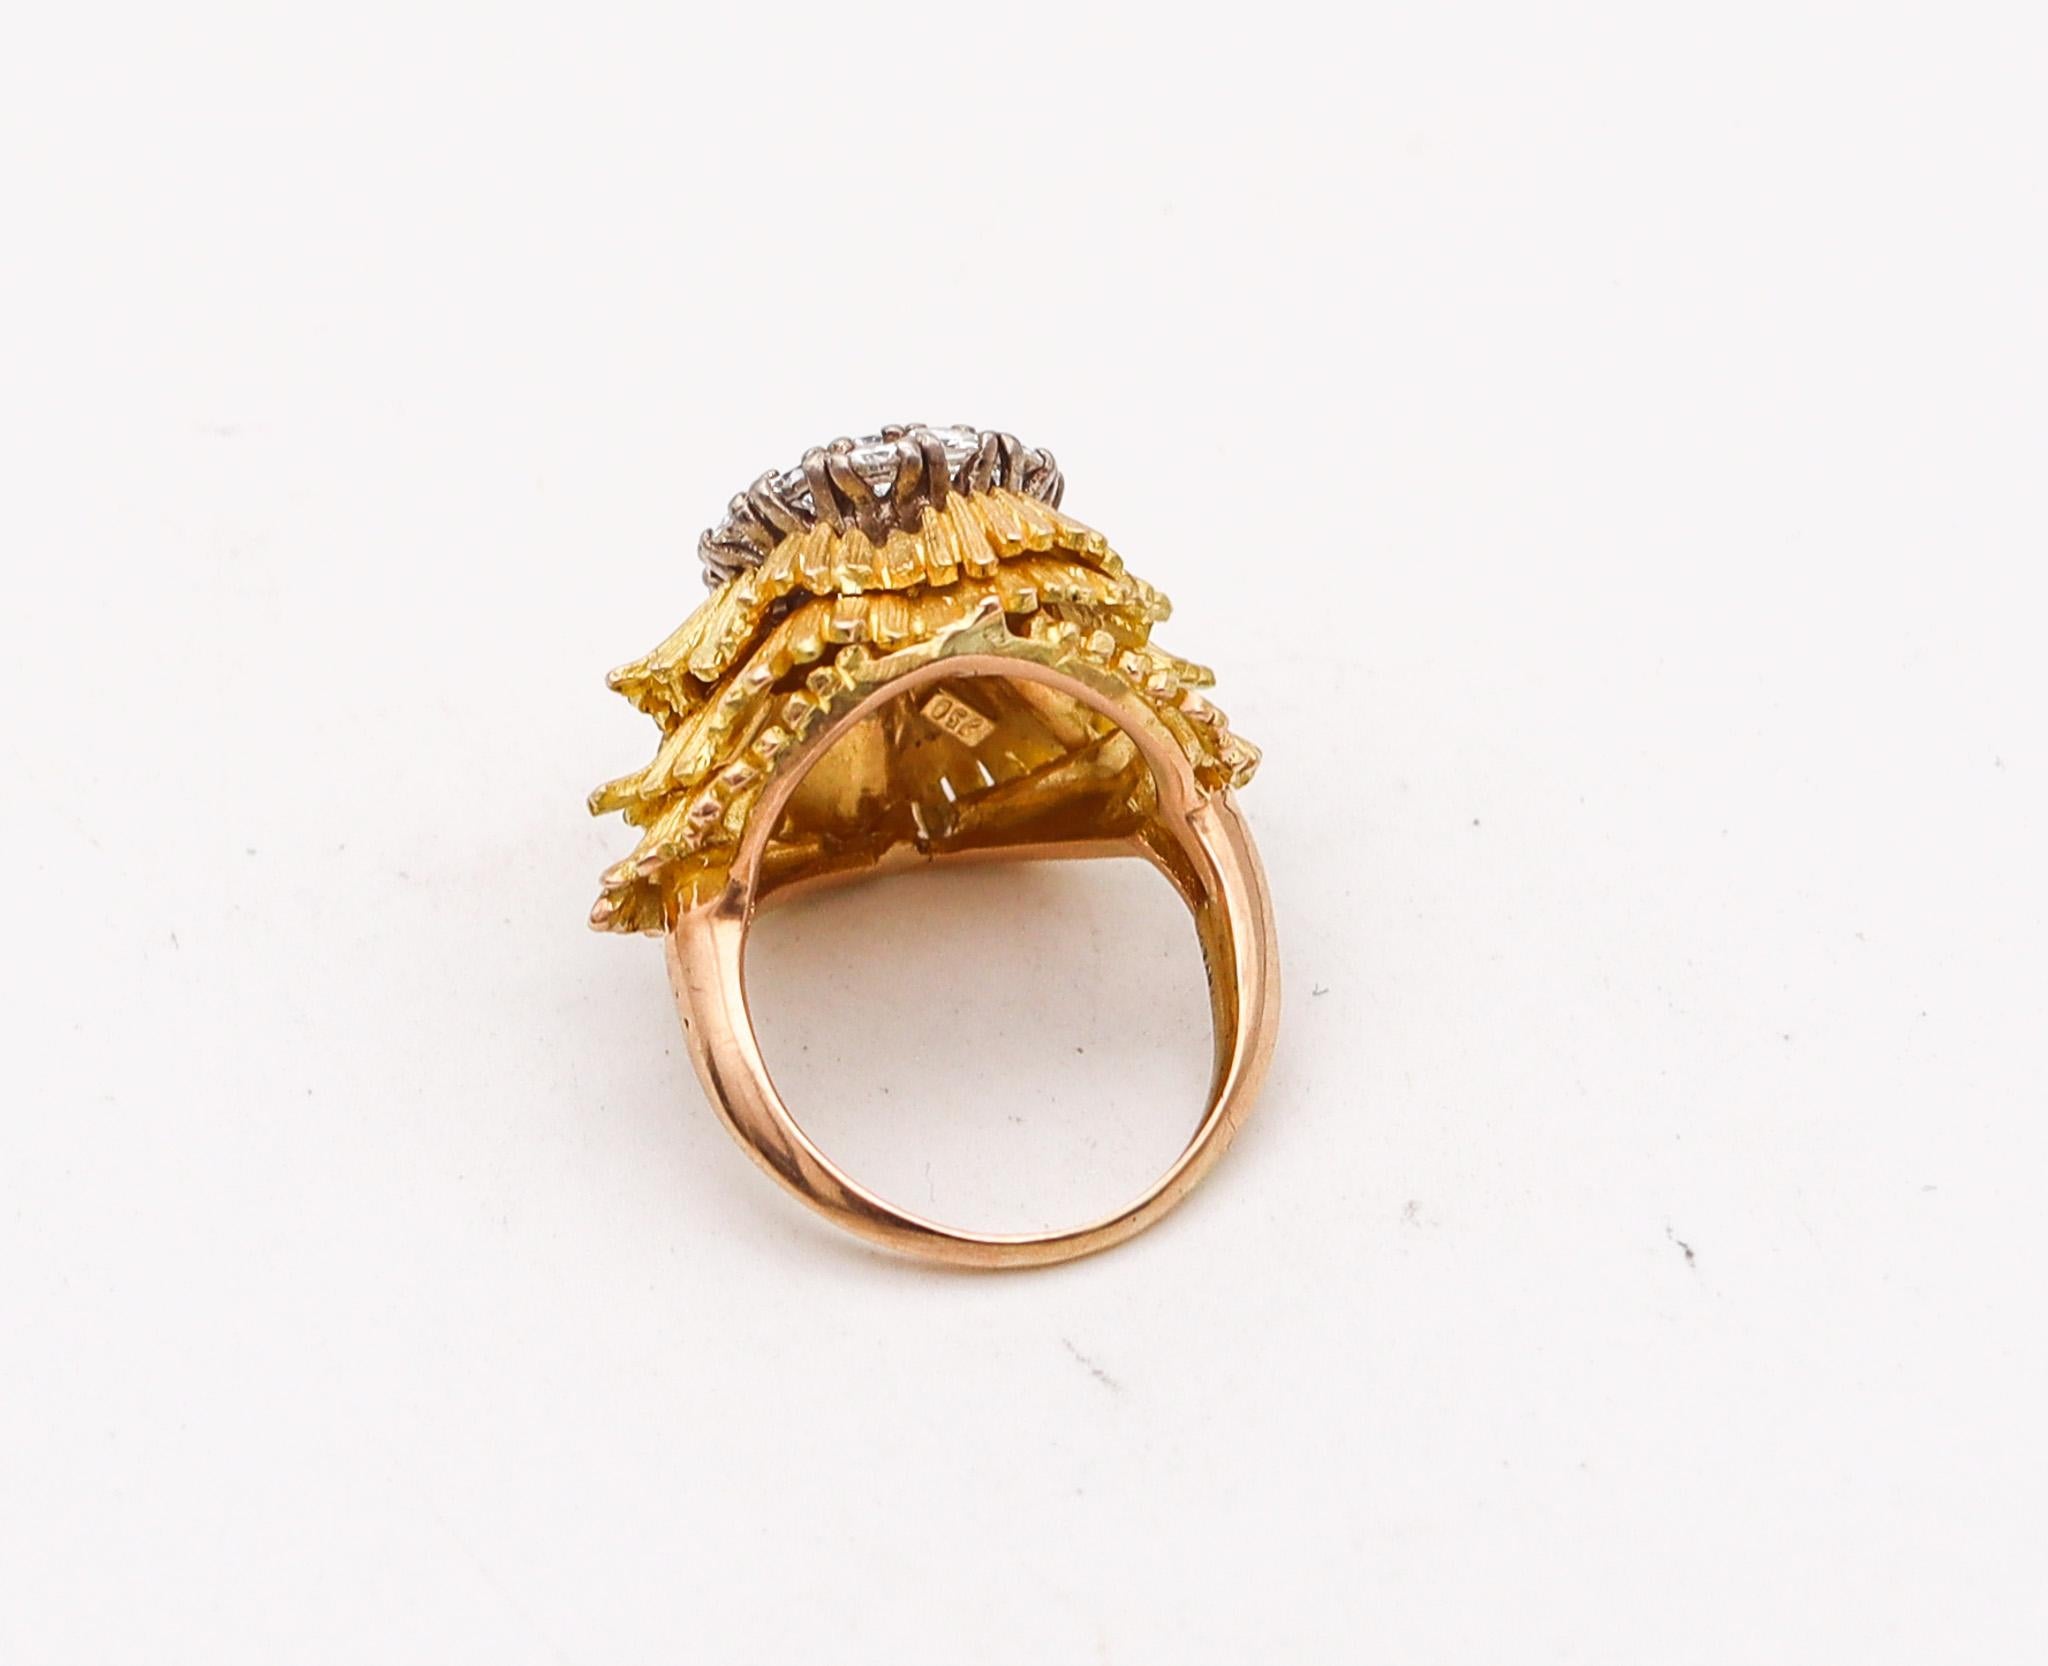 Brilliant Cut Tiffany & Co. 1960 Cluster Cocktail Ring In 18Kt Gold With 1.74 Ctw In Diamonds For Sale